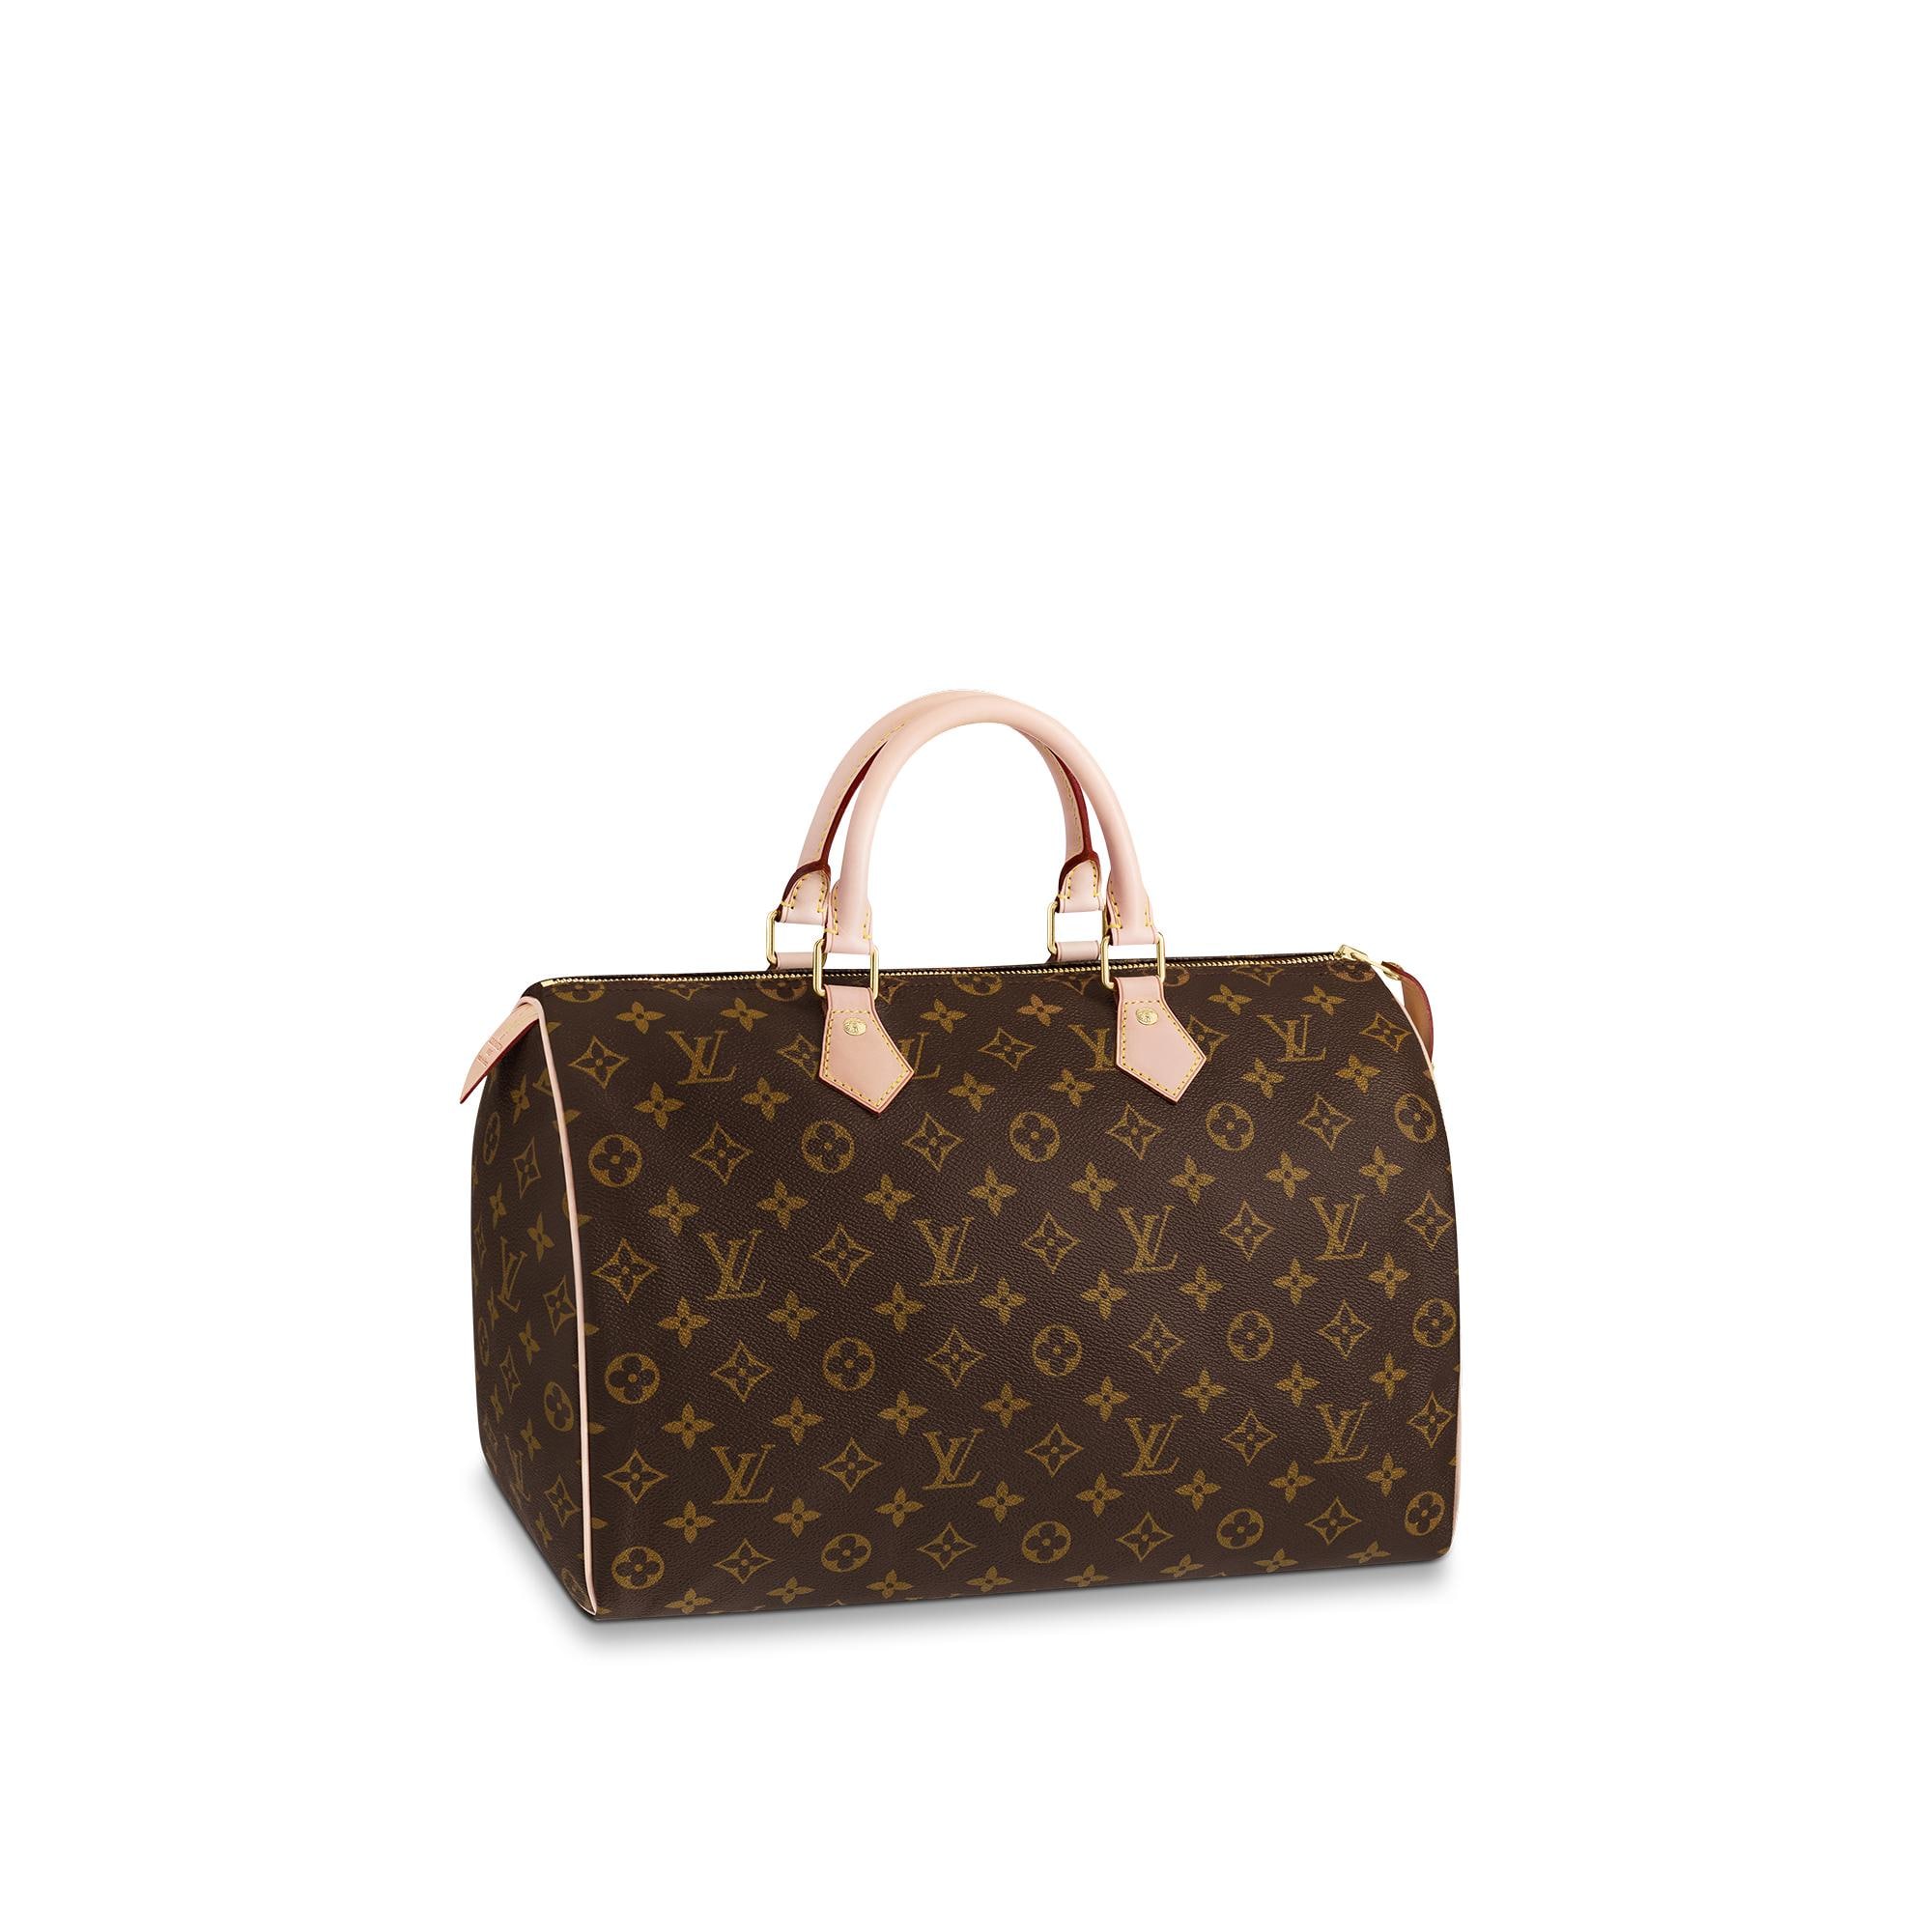 The 8 Most Popular Louis Vuitton Bags - luxfy